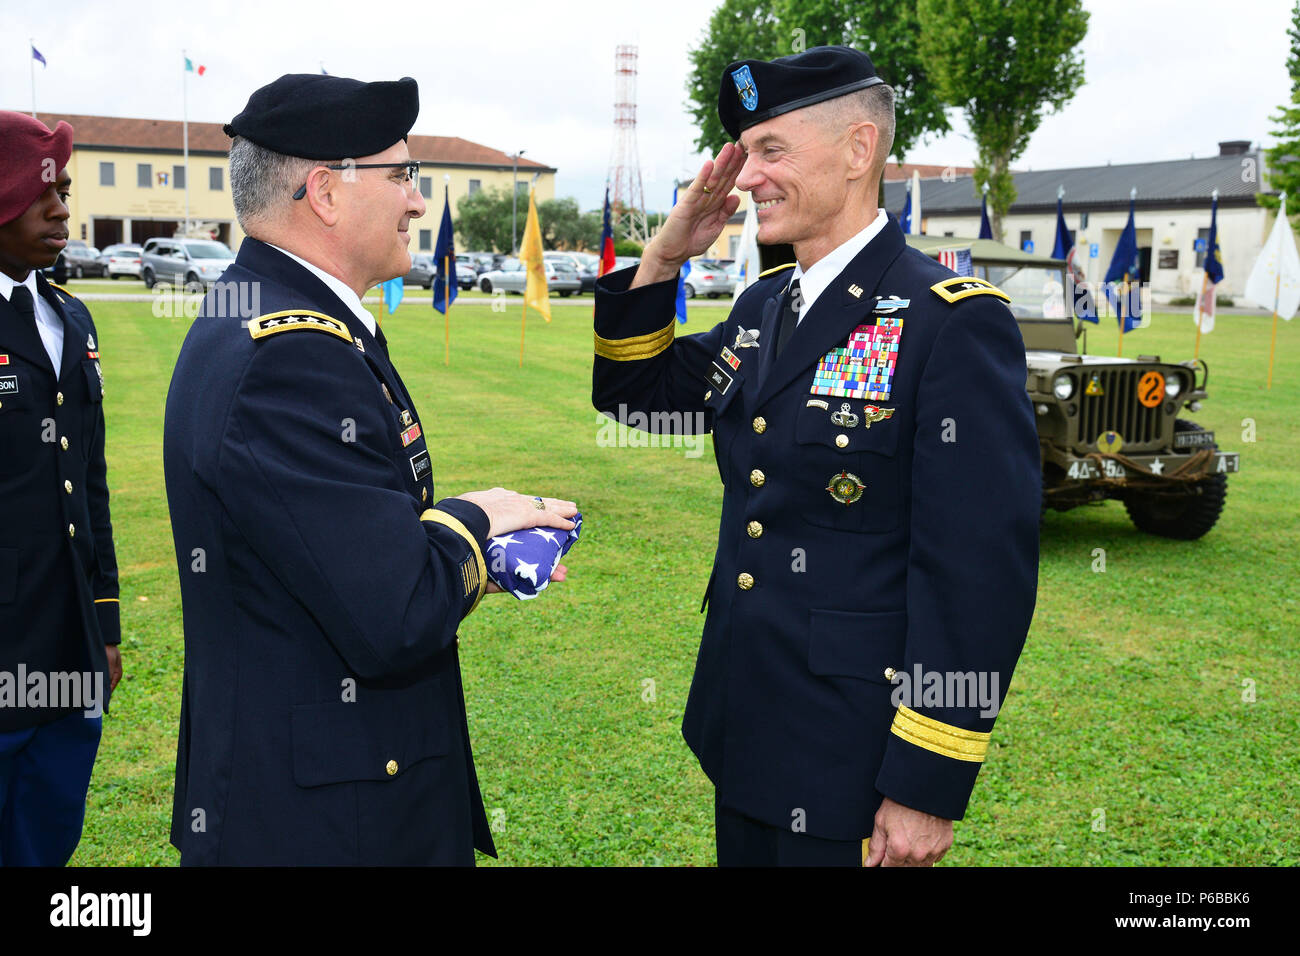 General Curtis M. Scaparrotti, Supreme Allied Commander Europe (SACEUR) commander (left), presents the American flag to Maj. Gen. Gordon B. “Skip” Davis Jr., Combined Security Transition Command – Afghanistan, Commander, during a retirement ceremony at Caserma C. Ederle Vicenza, Italy, June 22, 2018. (U.S. Army photo by Paolo Bovo). Stock Photo